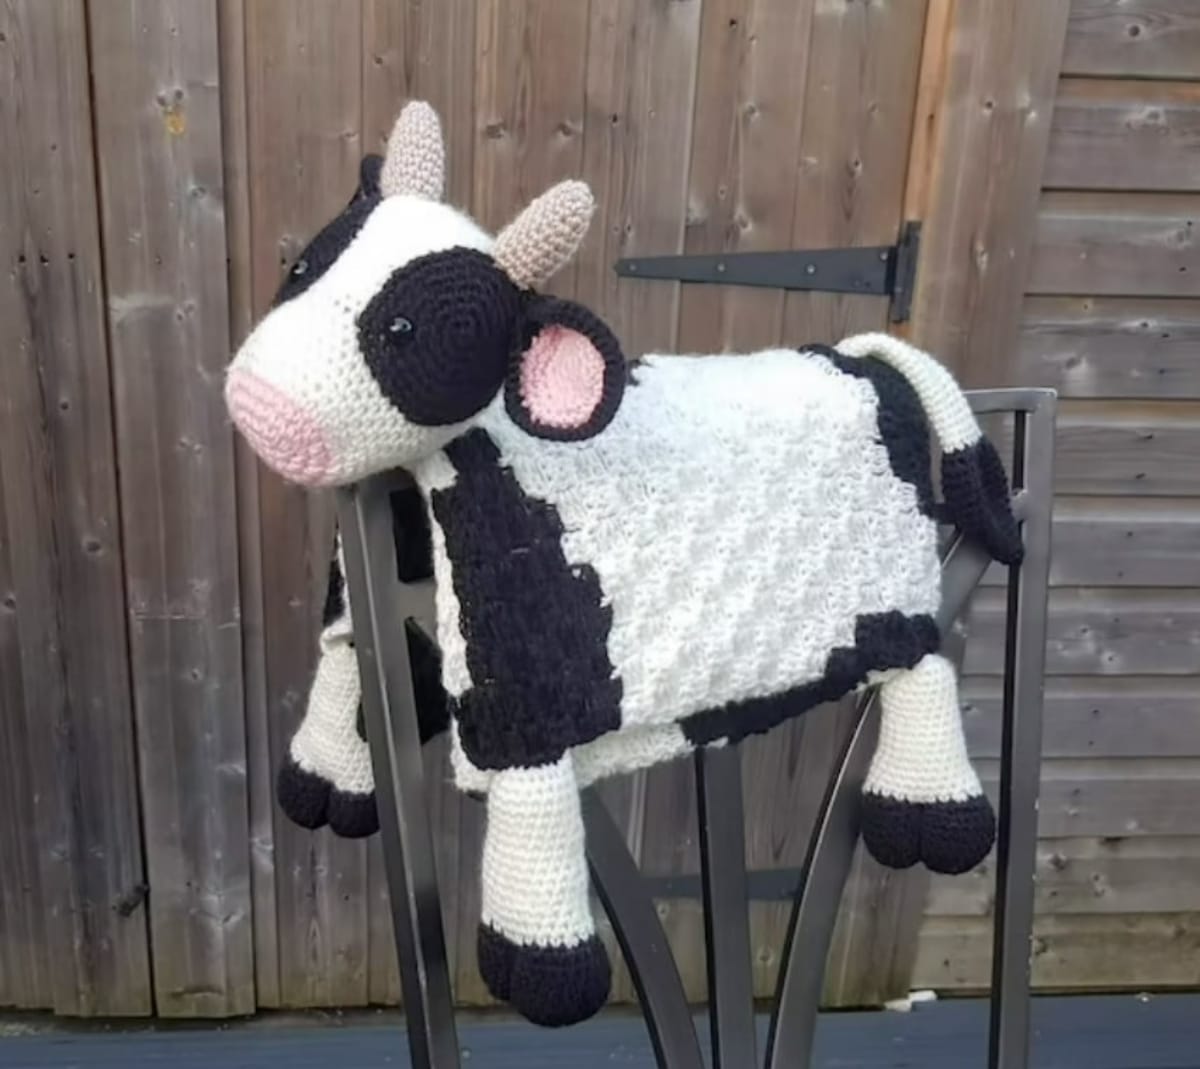 White and vlack crochet cow blanket with a cow’s head and legs attached draped over a brown wooden chair.